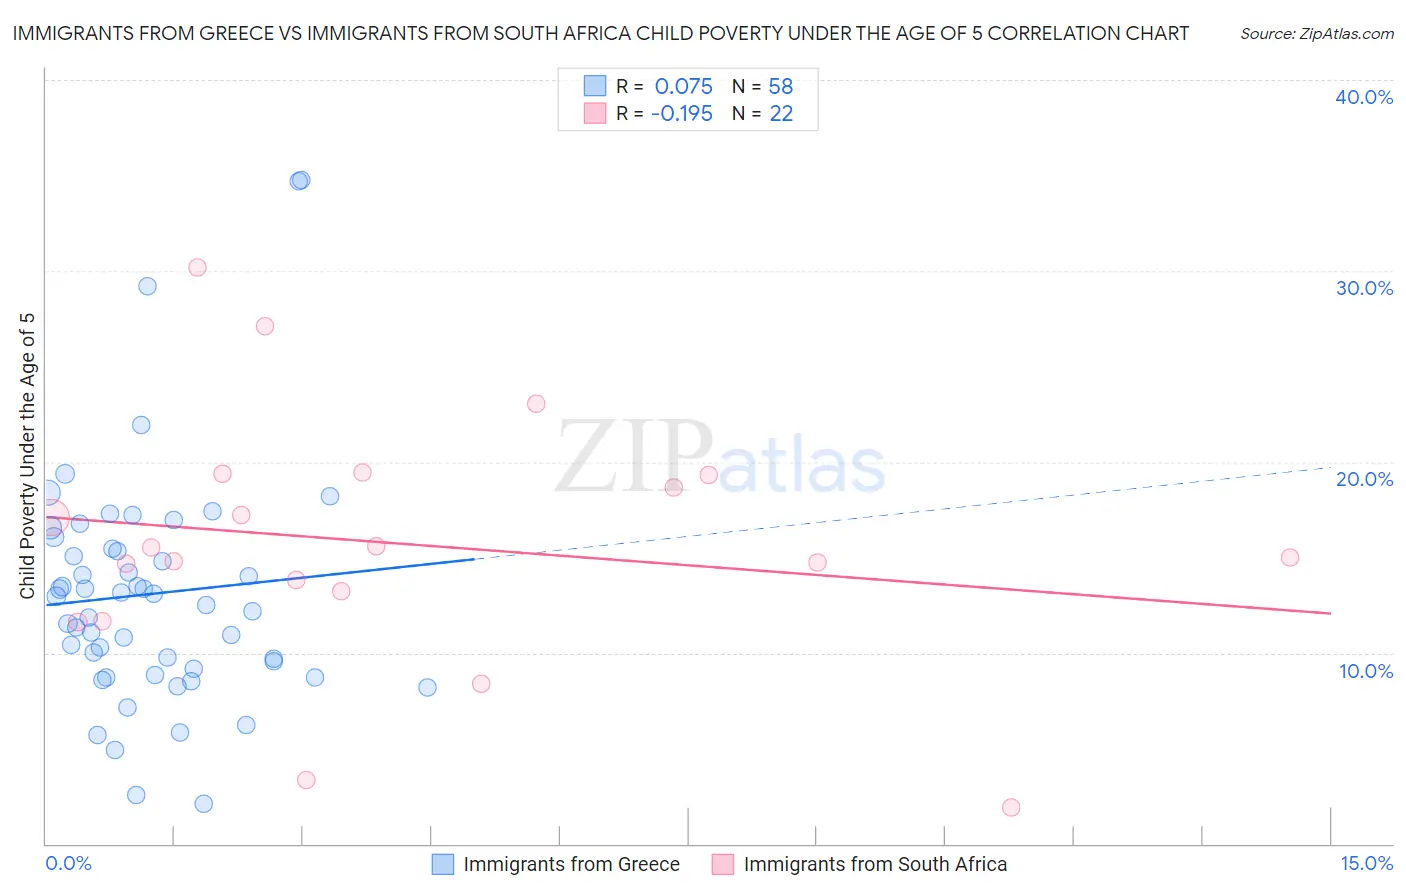 Immigrants from Greece vs Immigrants from South Africa Child Poverty Under the Age of 5